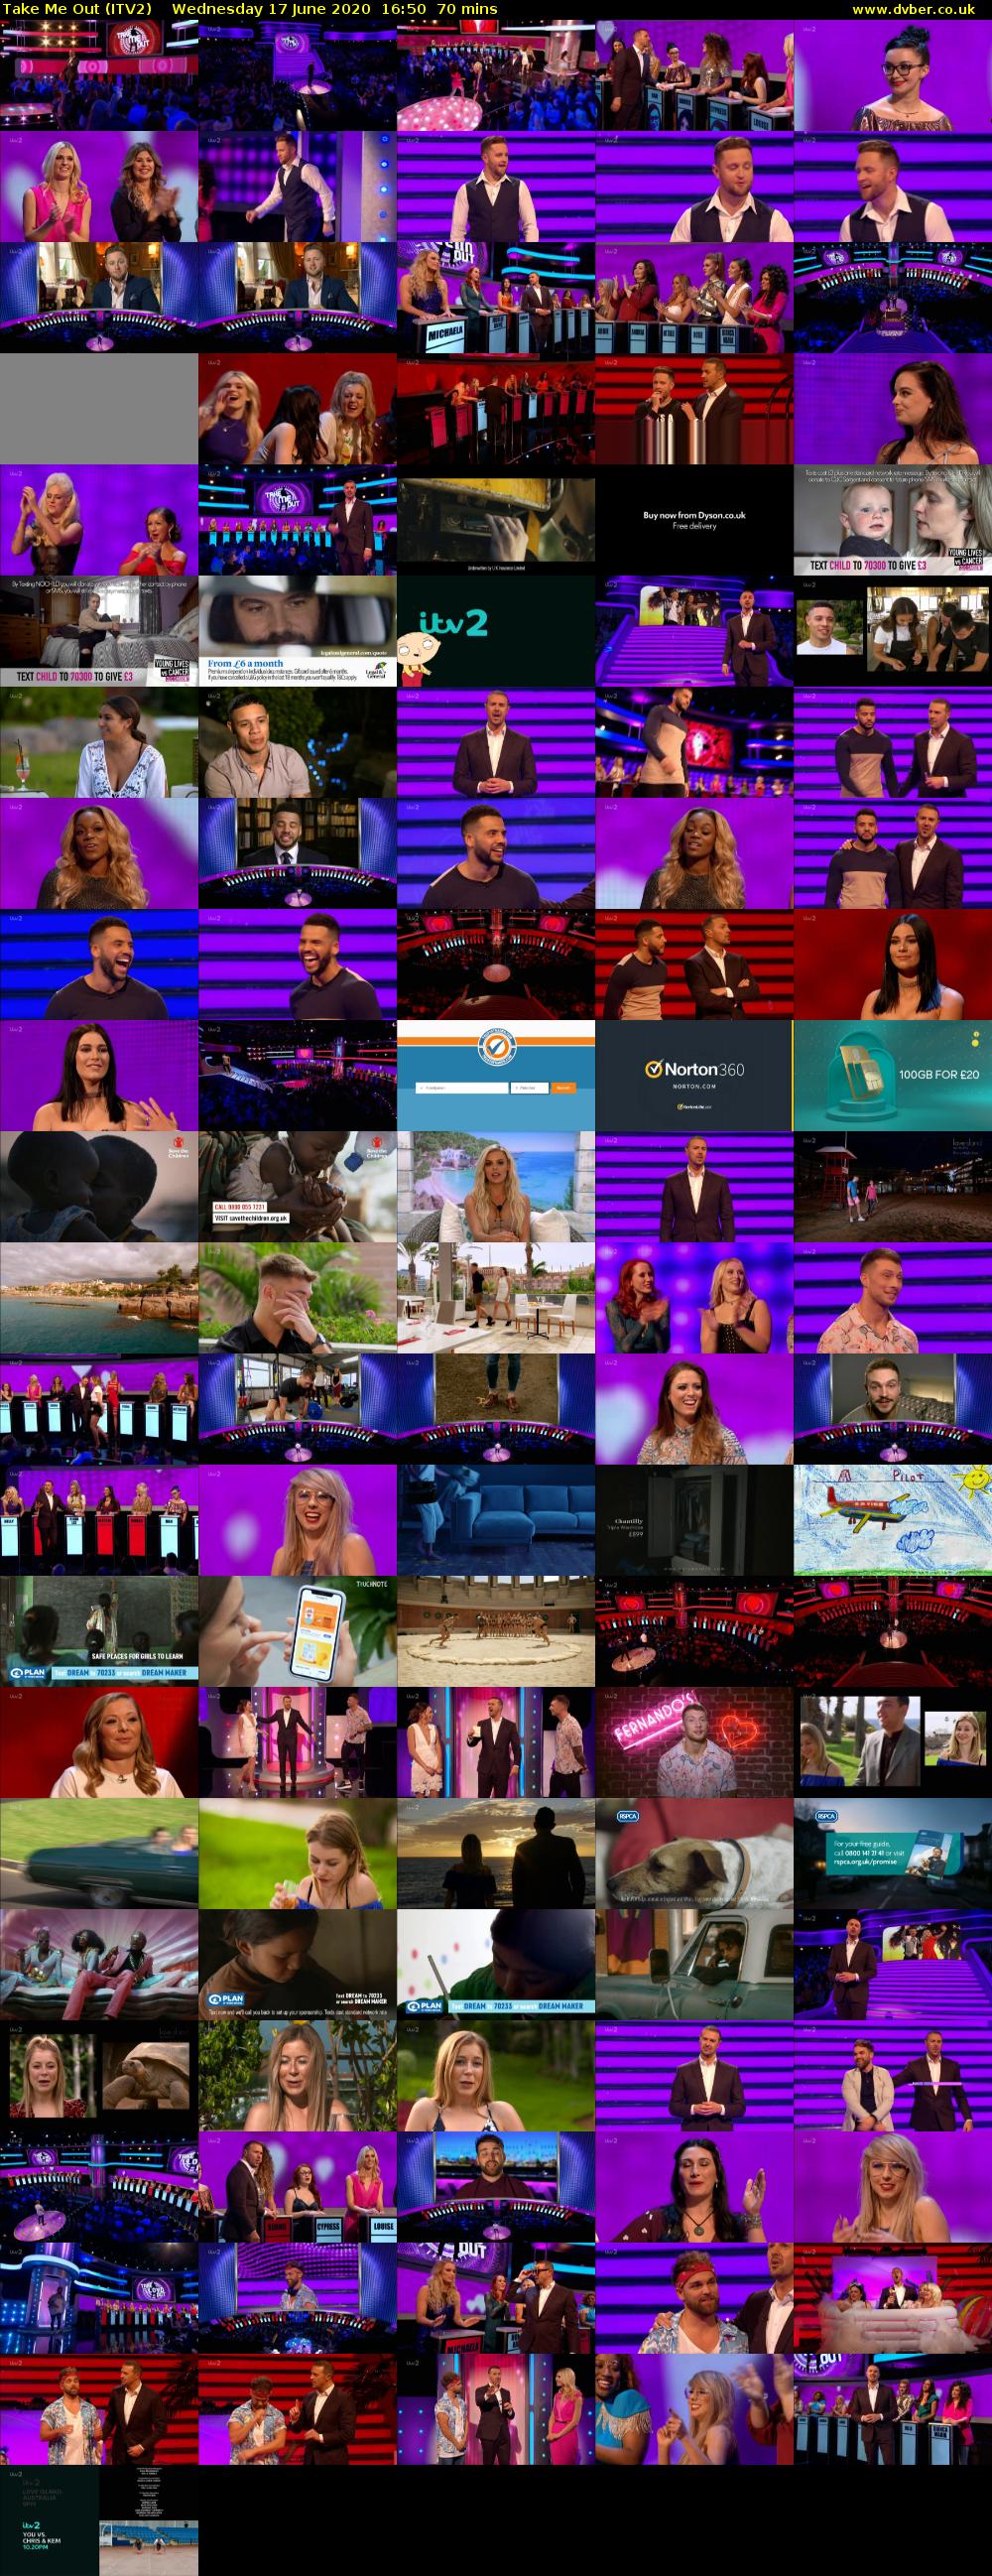 Take Me Out (ITV2) Wednesday 17 June 2020 16:50 - 18:00